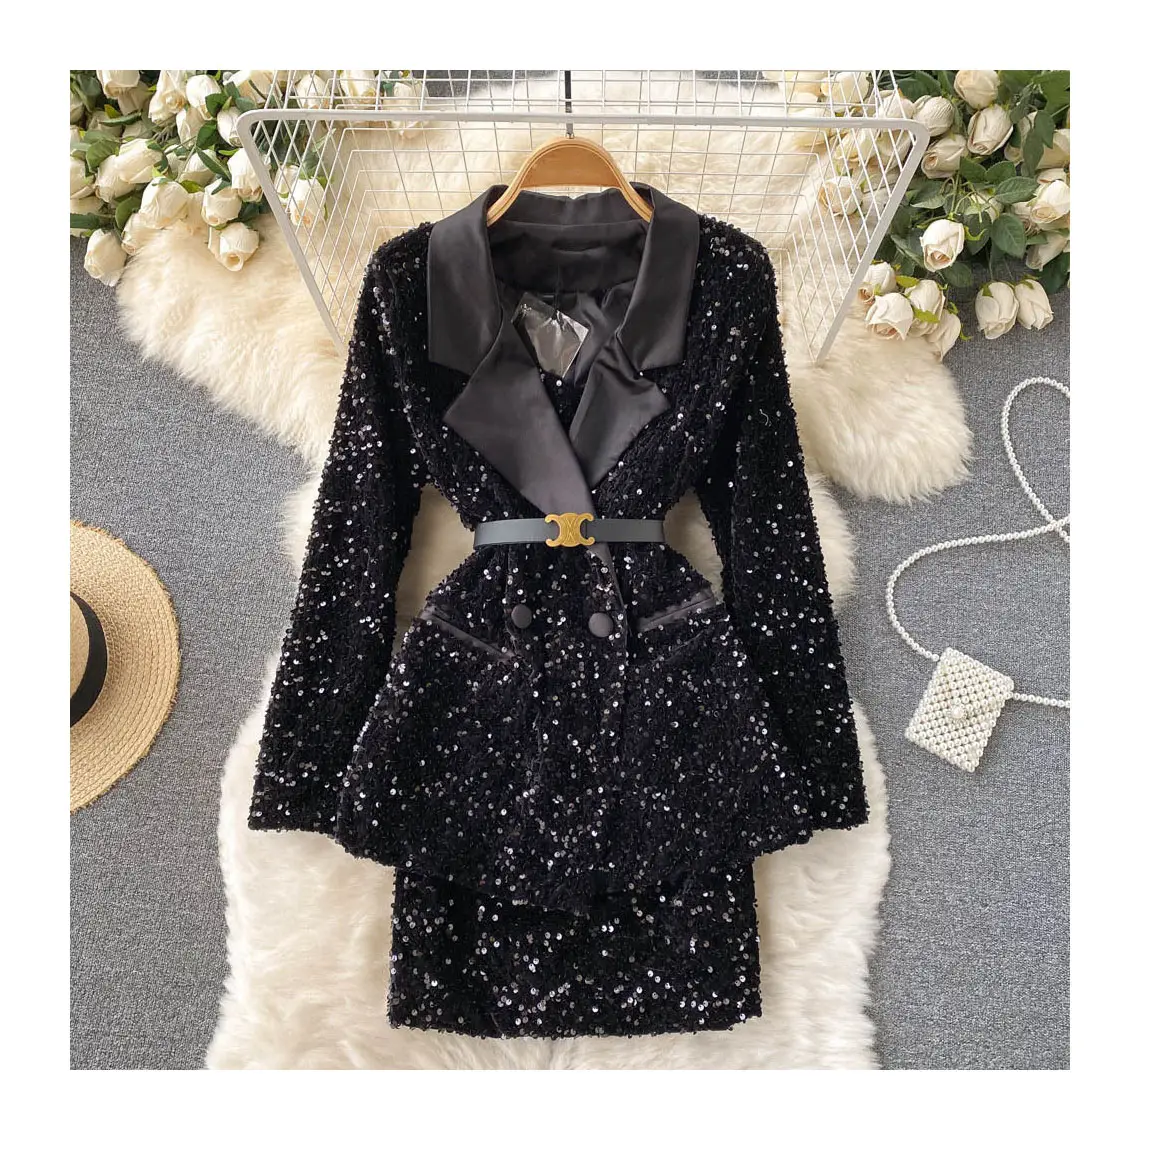 Jacket Fall Winter Suit Sets Ladies Classy Women Dress And Blazer And Short Set Sexy Plus Size Professional Clothes For Women